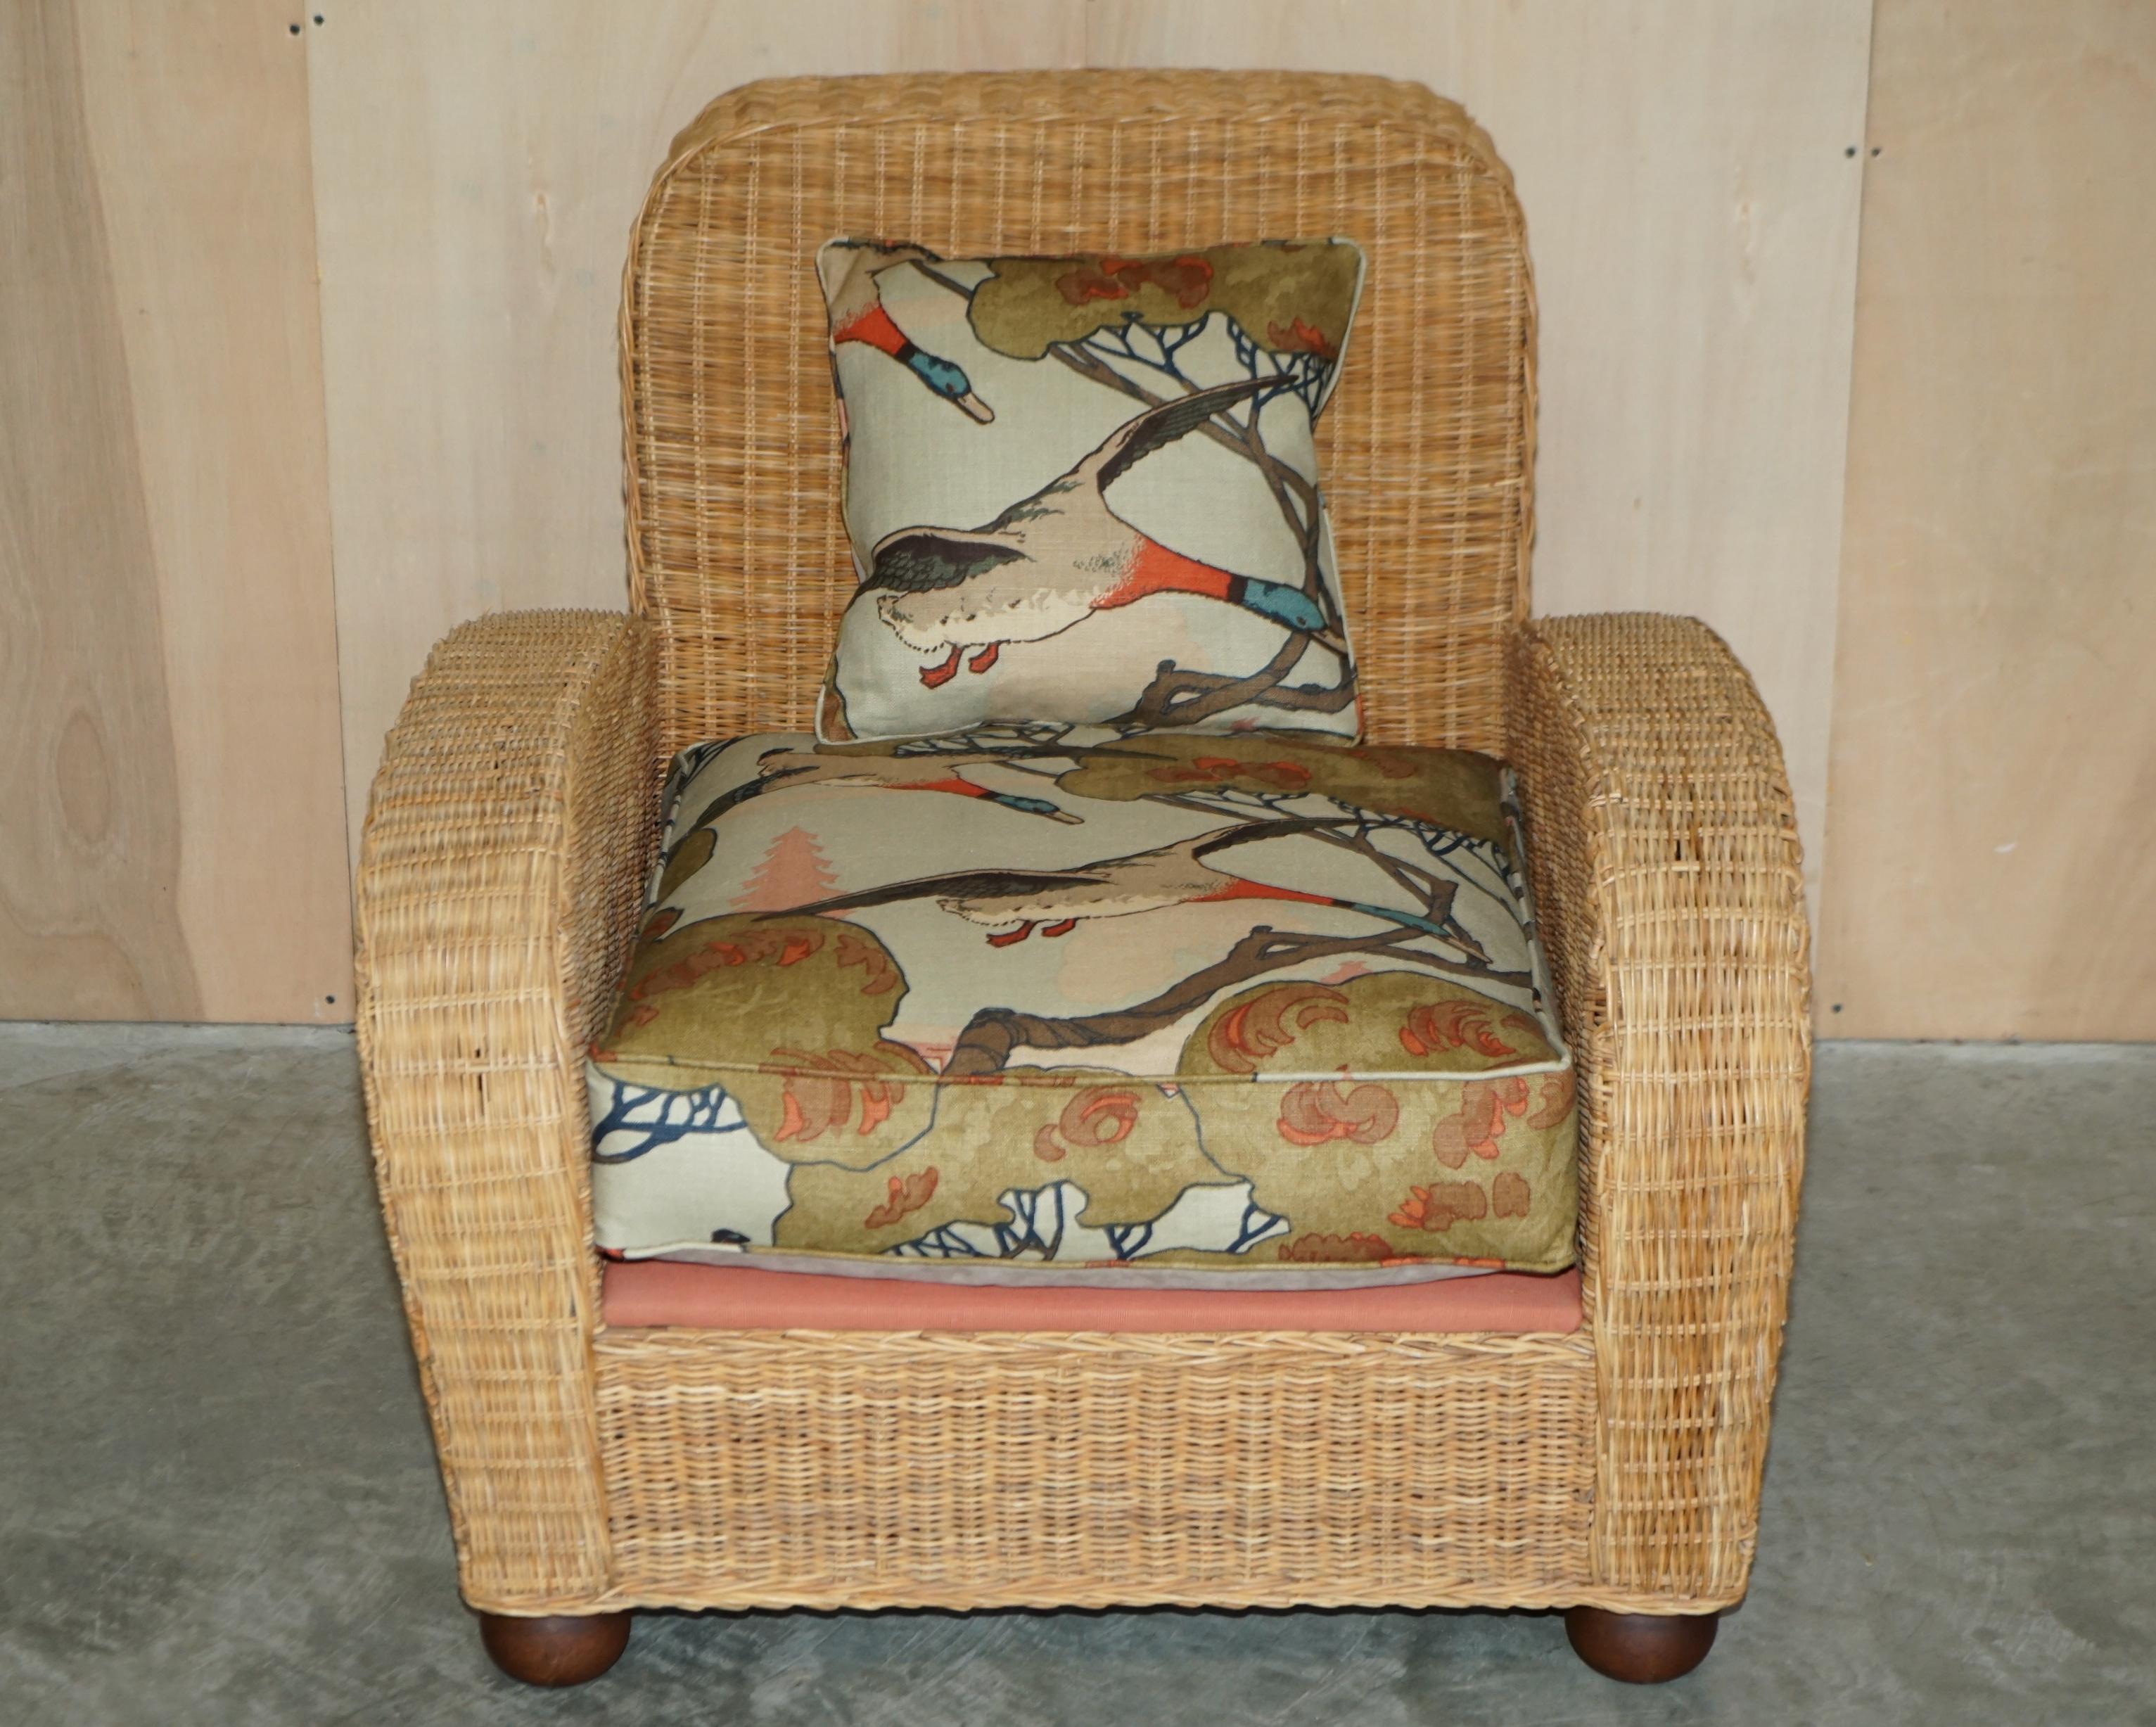 Art Deco PAIR OF ART DECO STYLE WICKER CLUB ARMCHAIRS WiTH MULBERRY FLYING DUCKS CUSHIONS For Sale